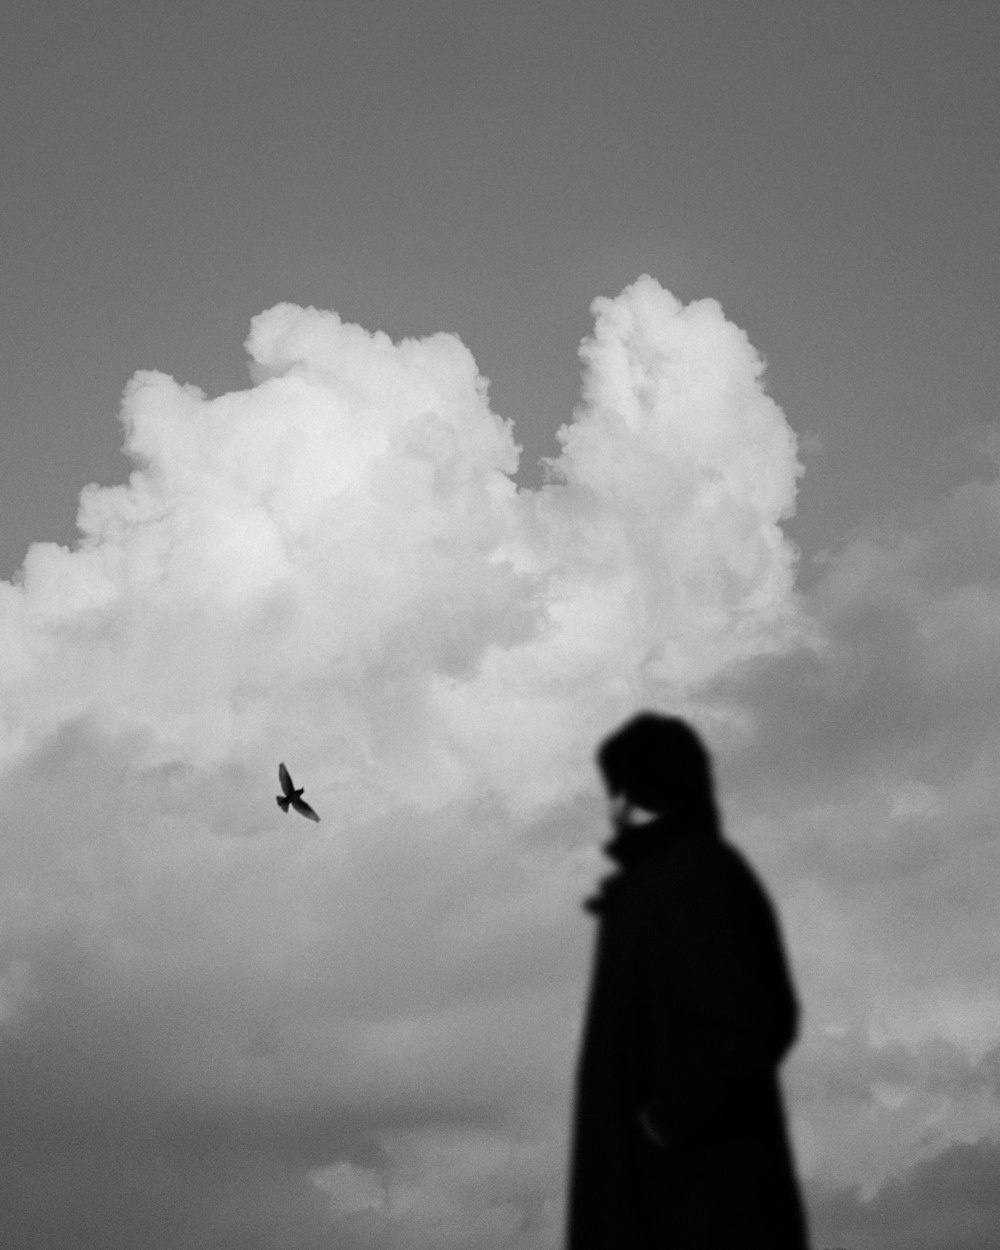 grayscale photography of silhouette of a person and a bird